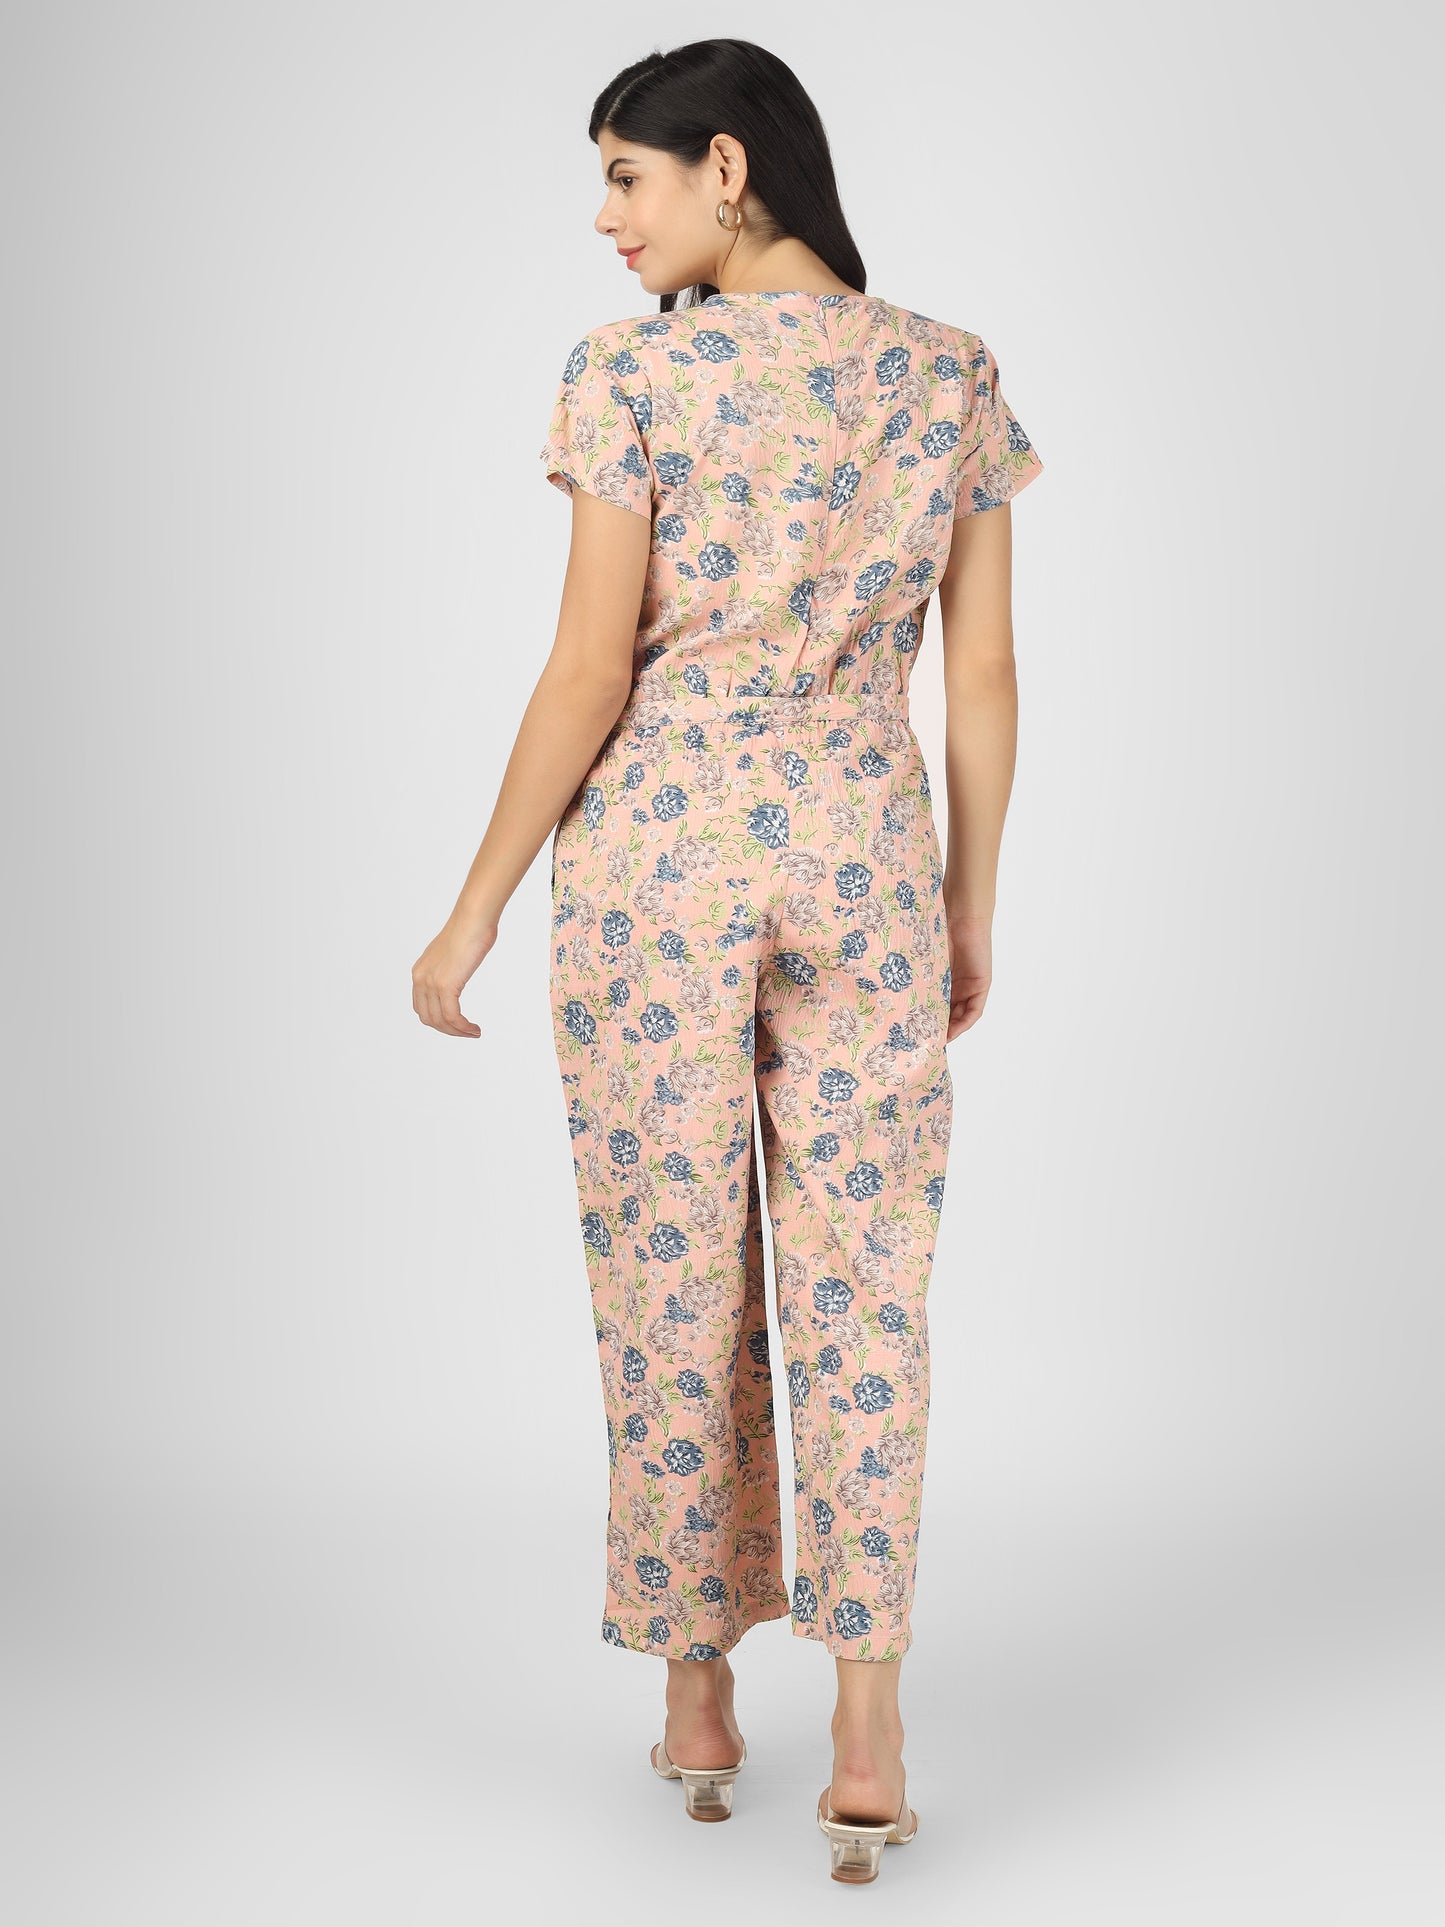 Stylish Peach Floral Printed Jumpsuit with Tie-up knot in front